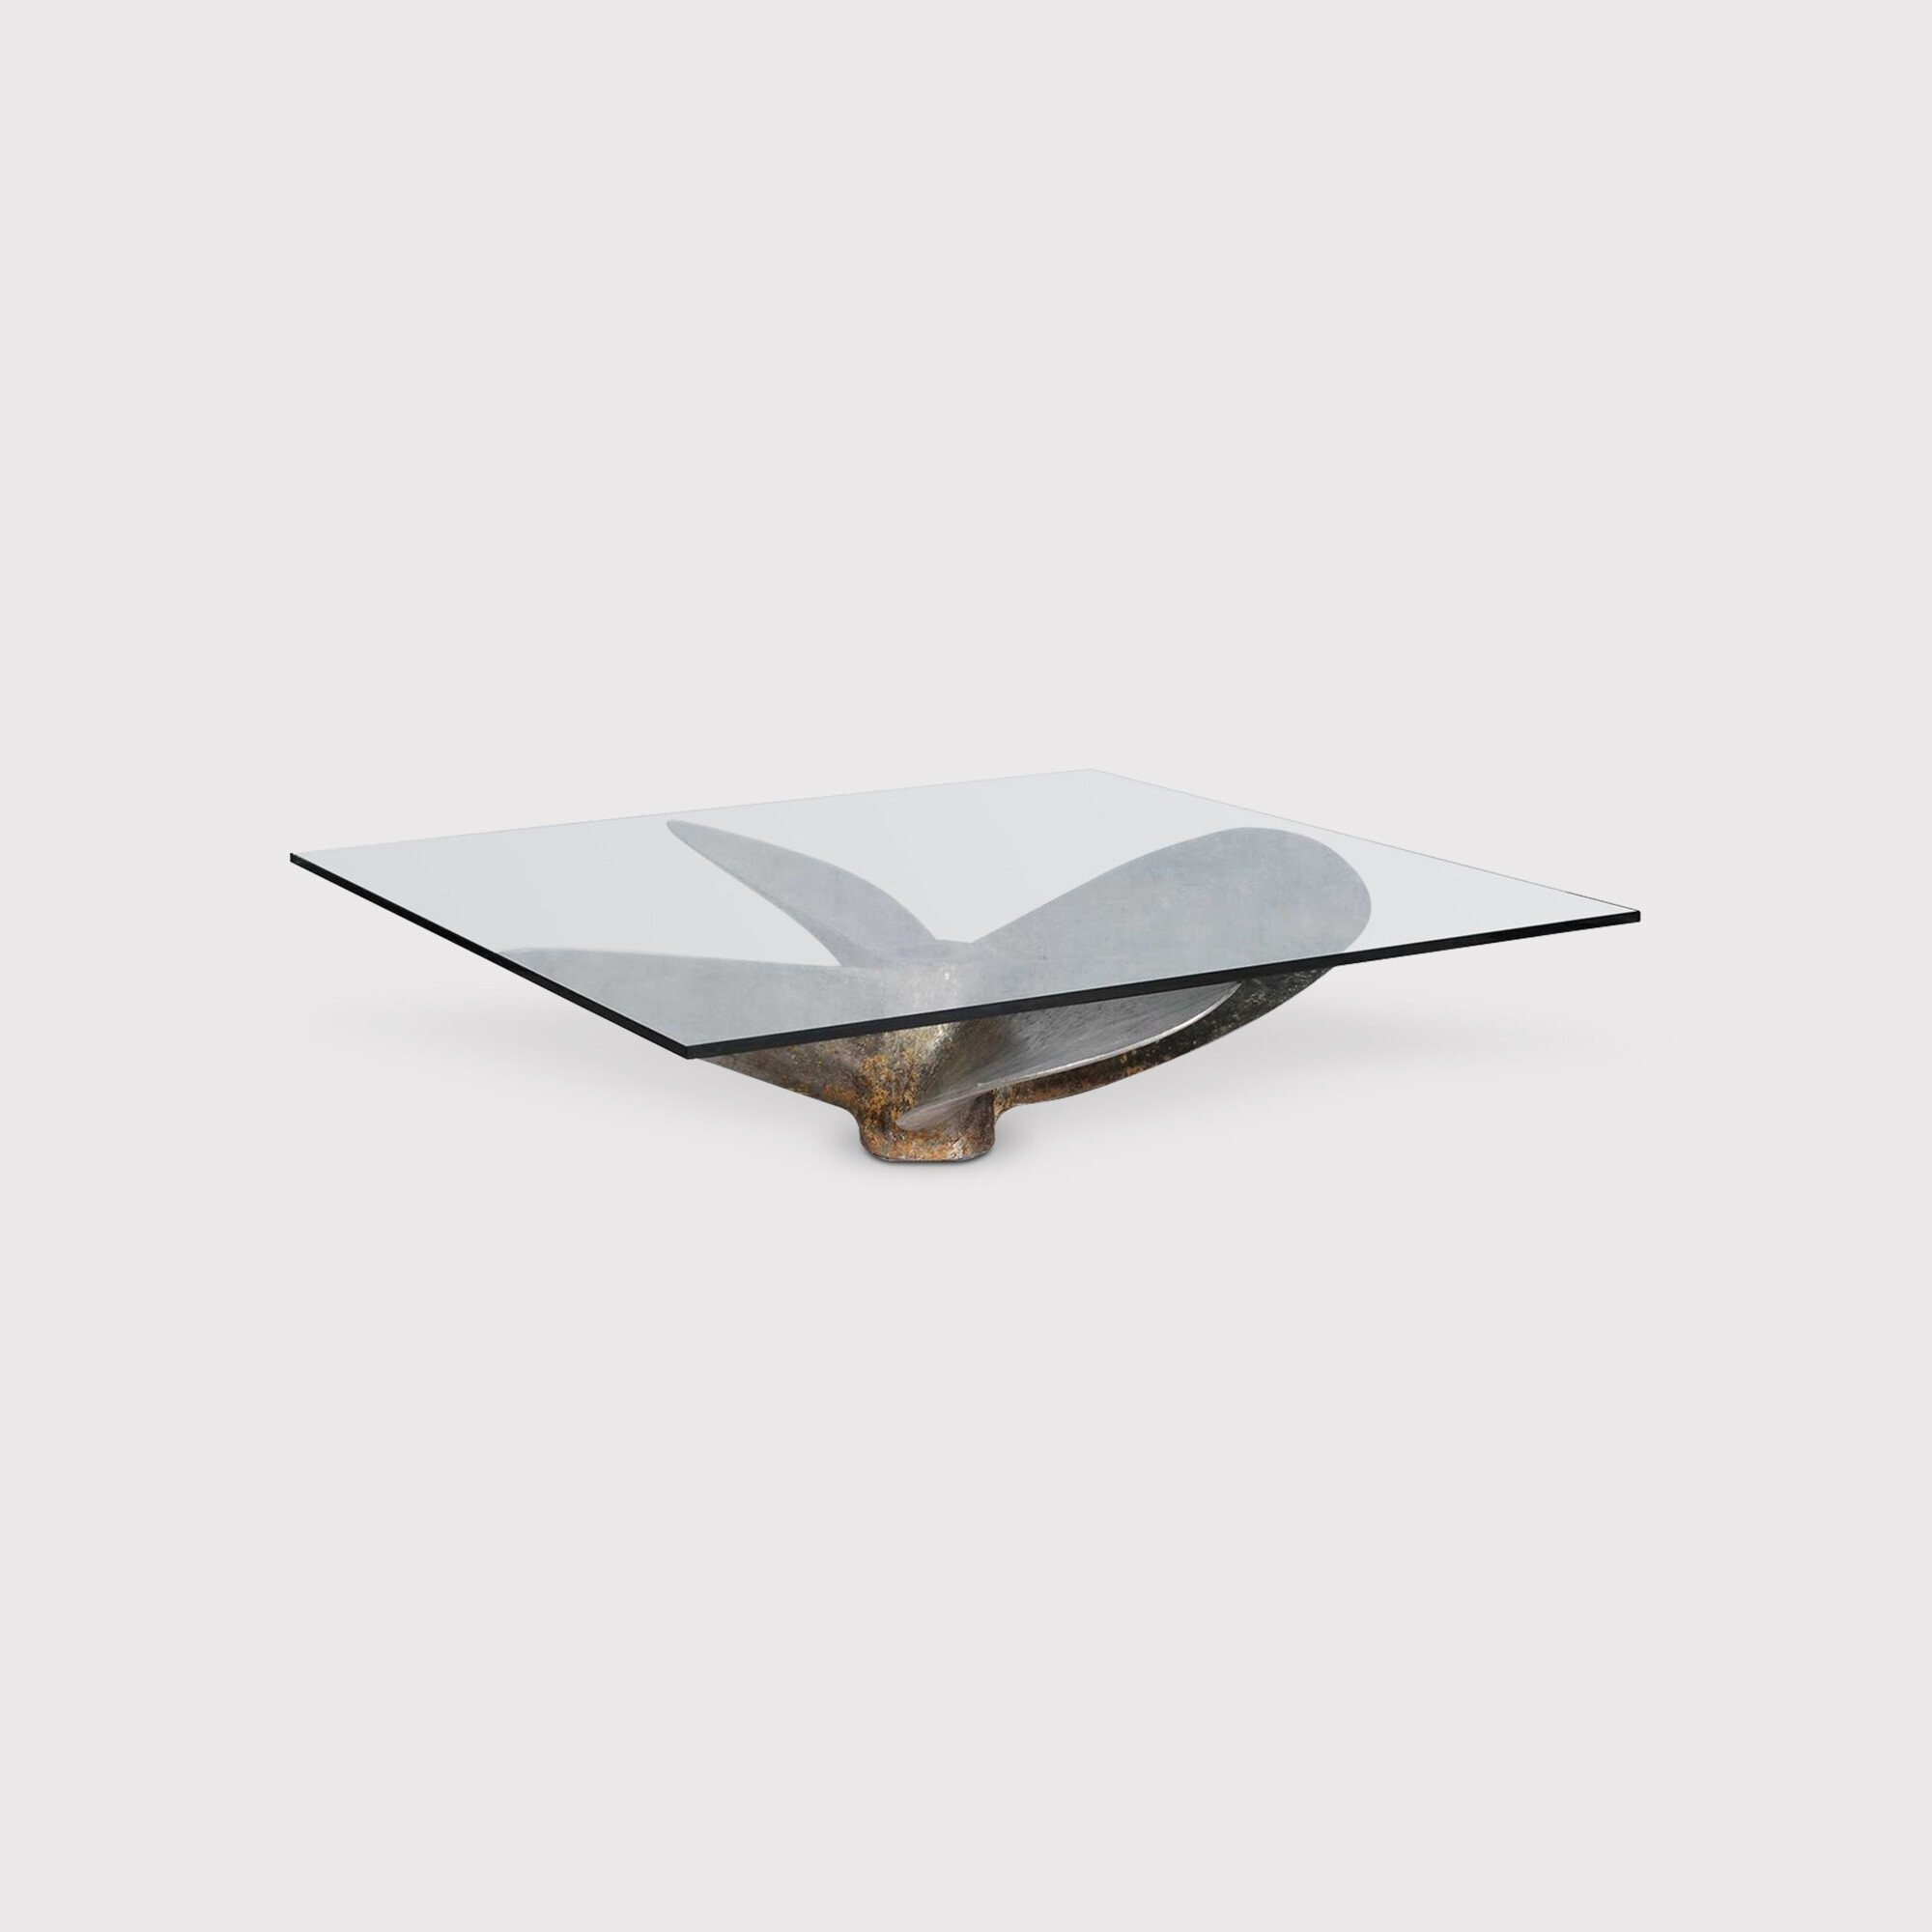 Timothy Oulton Junk Art Propeller Square Coffee Table Small, Silver Glass - Barker & Stonehouse - image 1